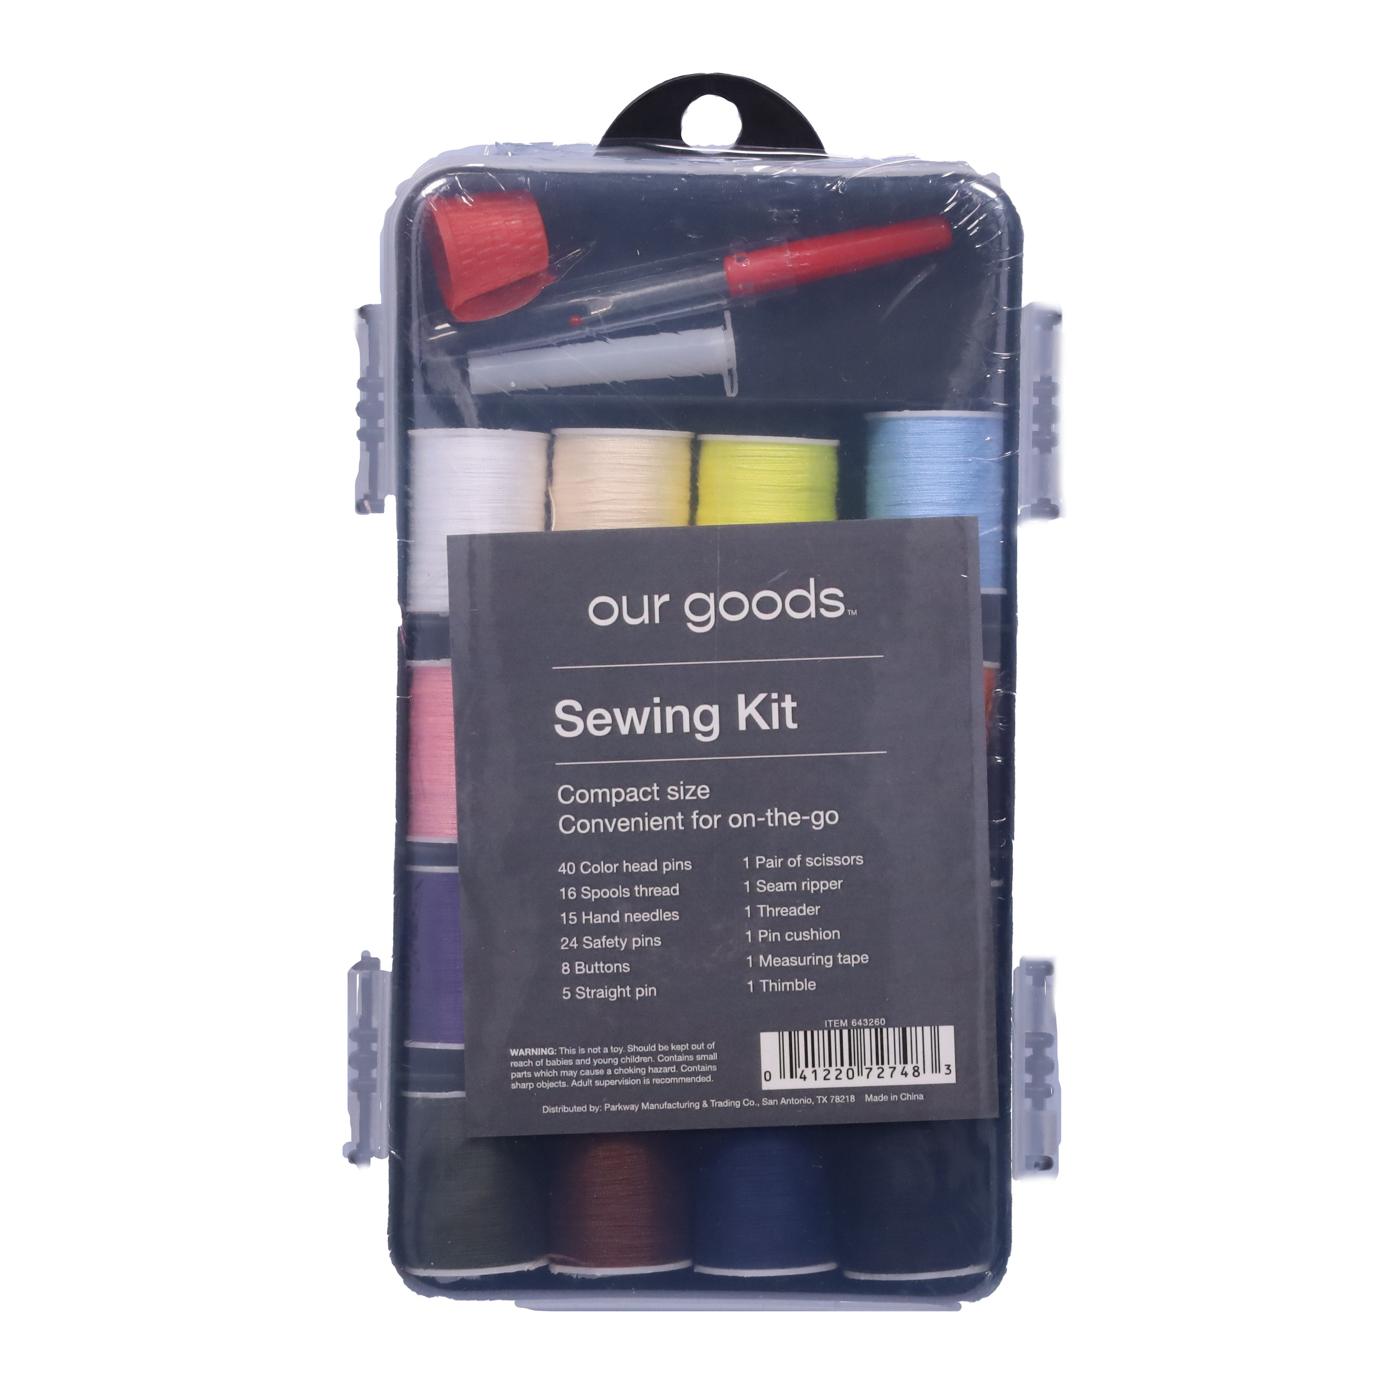 How To Make A Travel Sewing Kit  Travel sewing kit, Travel sewing